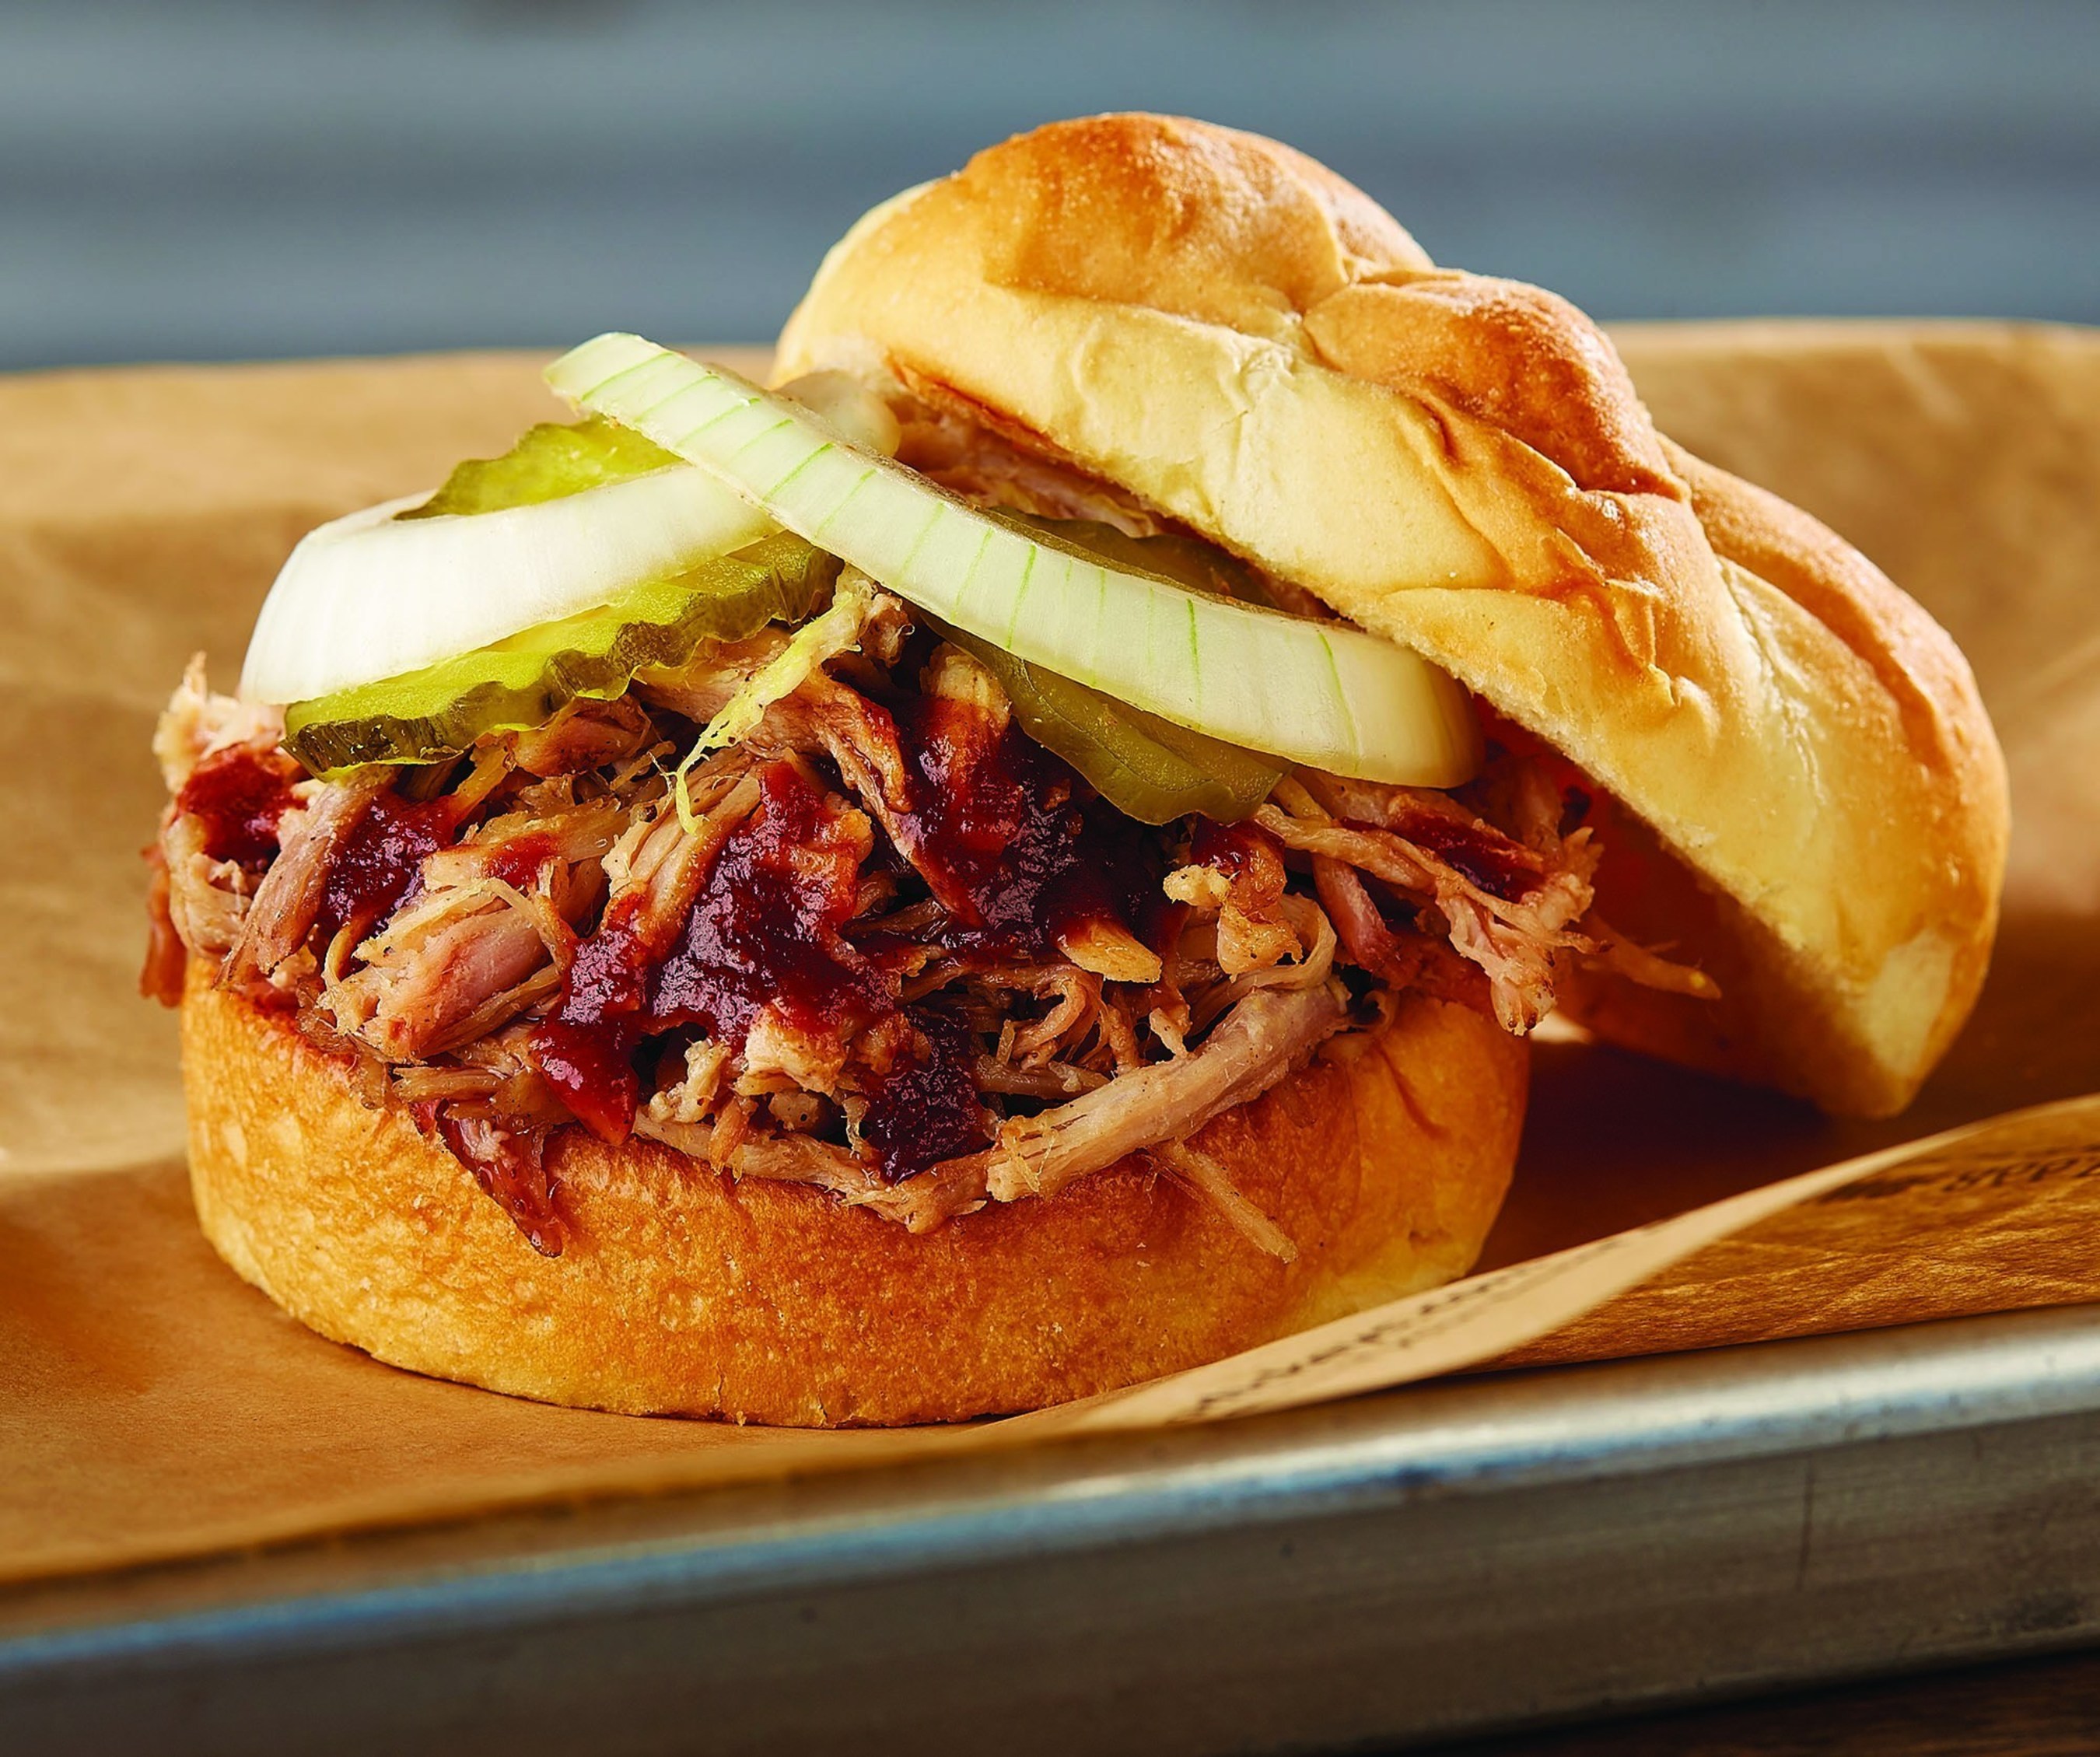 Dickey's Barbecue Pit opens in Fresno on Thursday with a three day grand opening. Location serves up $2 pulled pork sandwiches on Saturday when three lucky guests win free barbecue for an entire year!